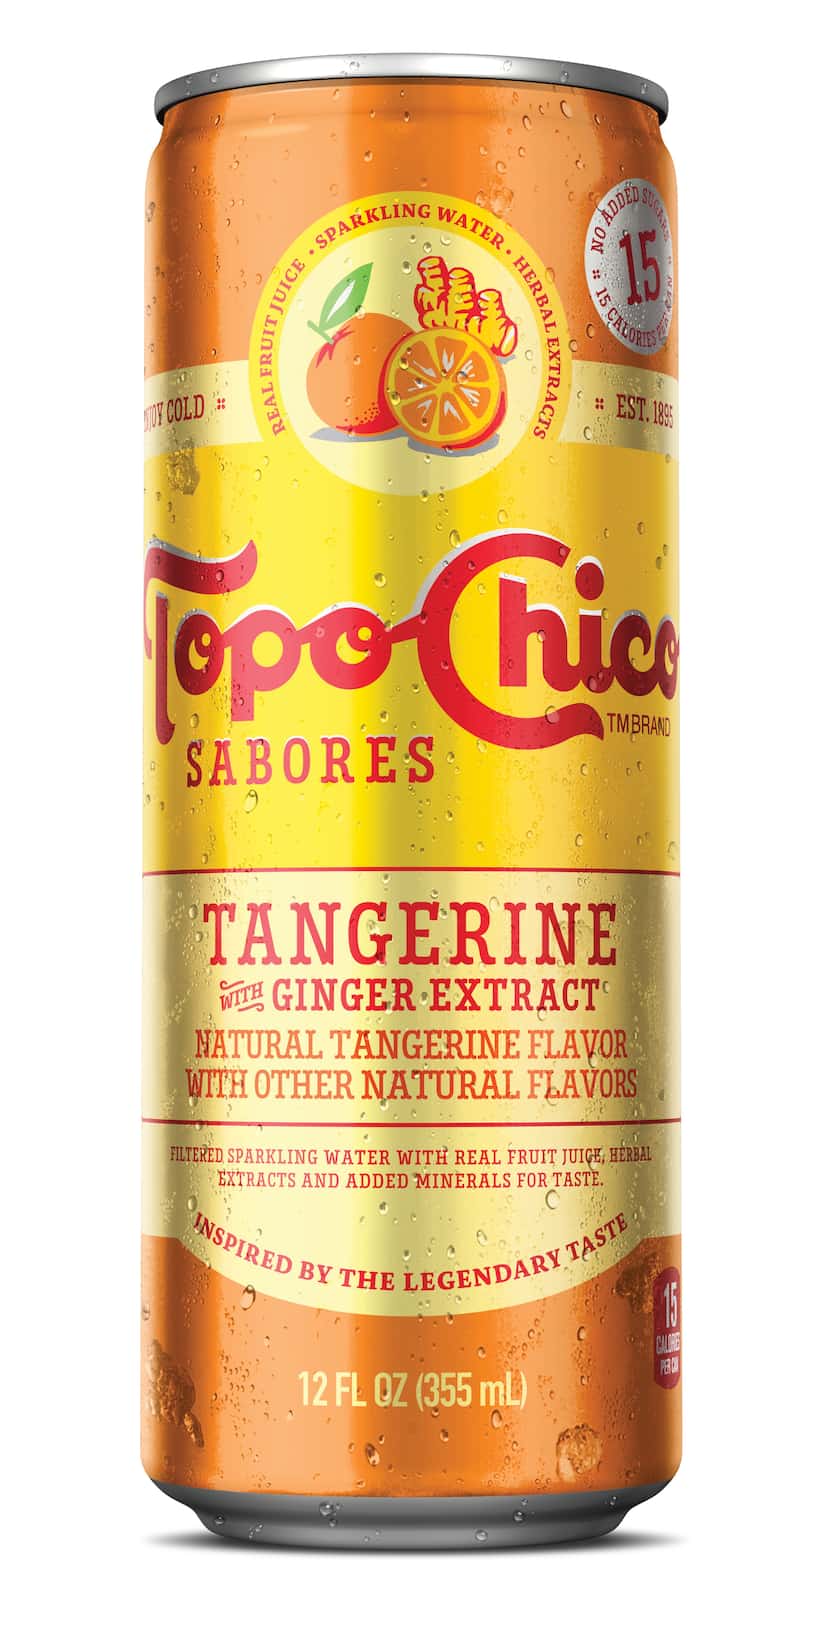 Topo Chico launches Sabores, a new line of sparkling seltzers in cans. There are three new...